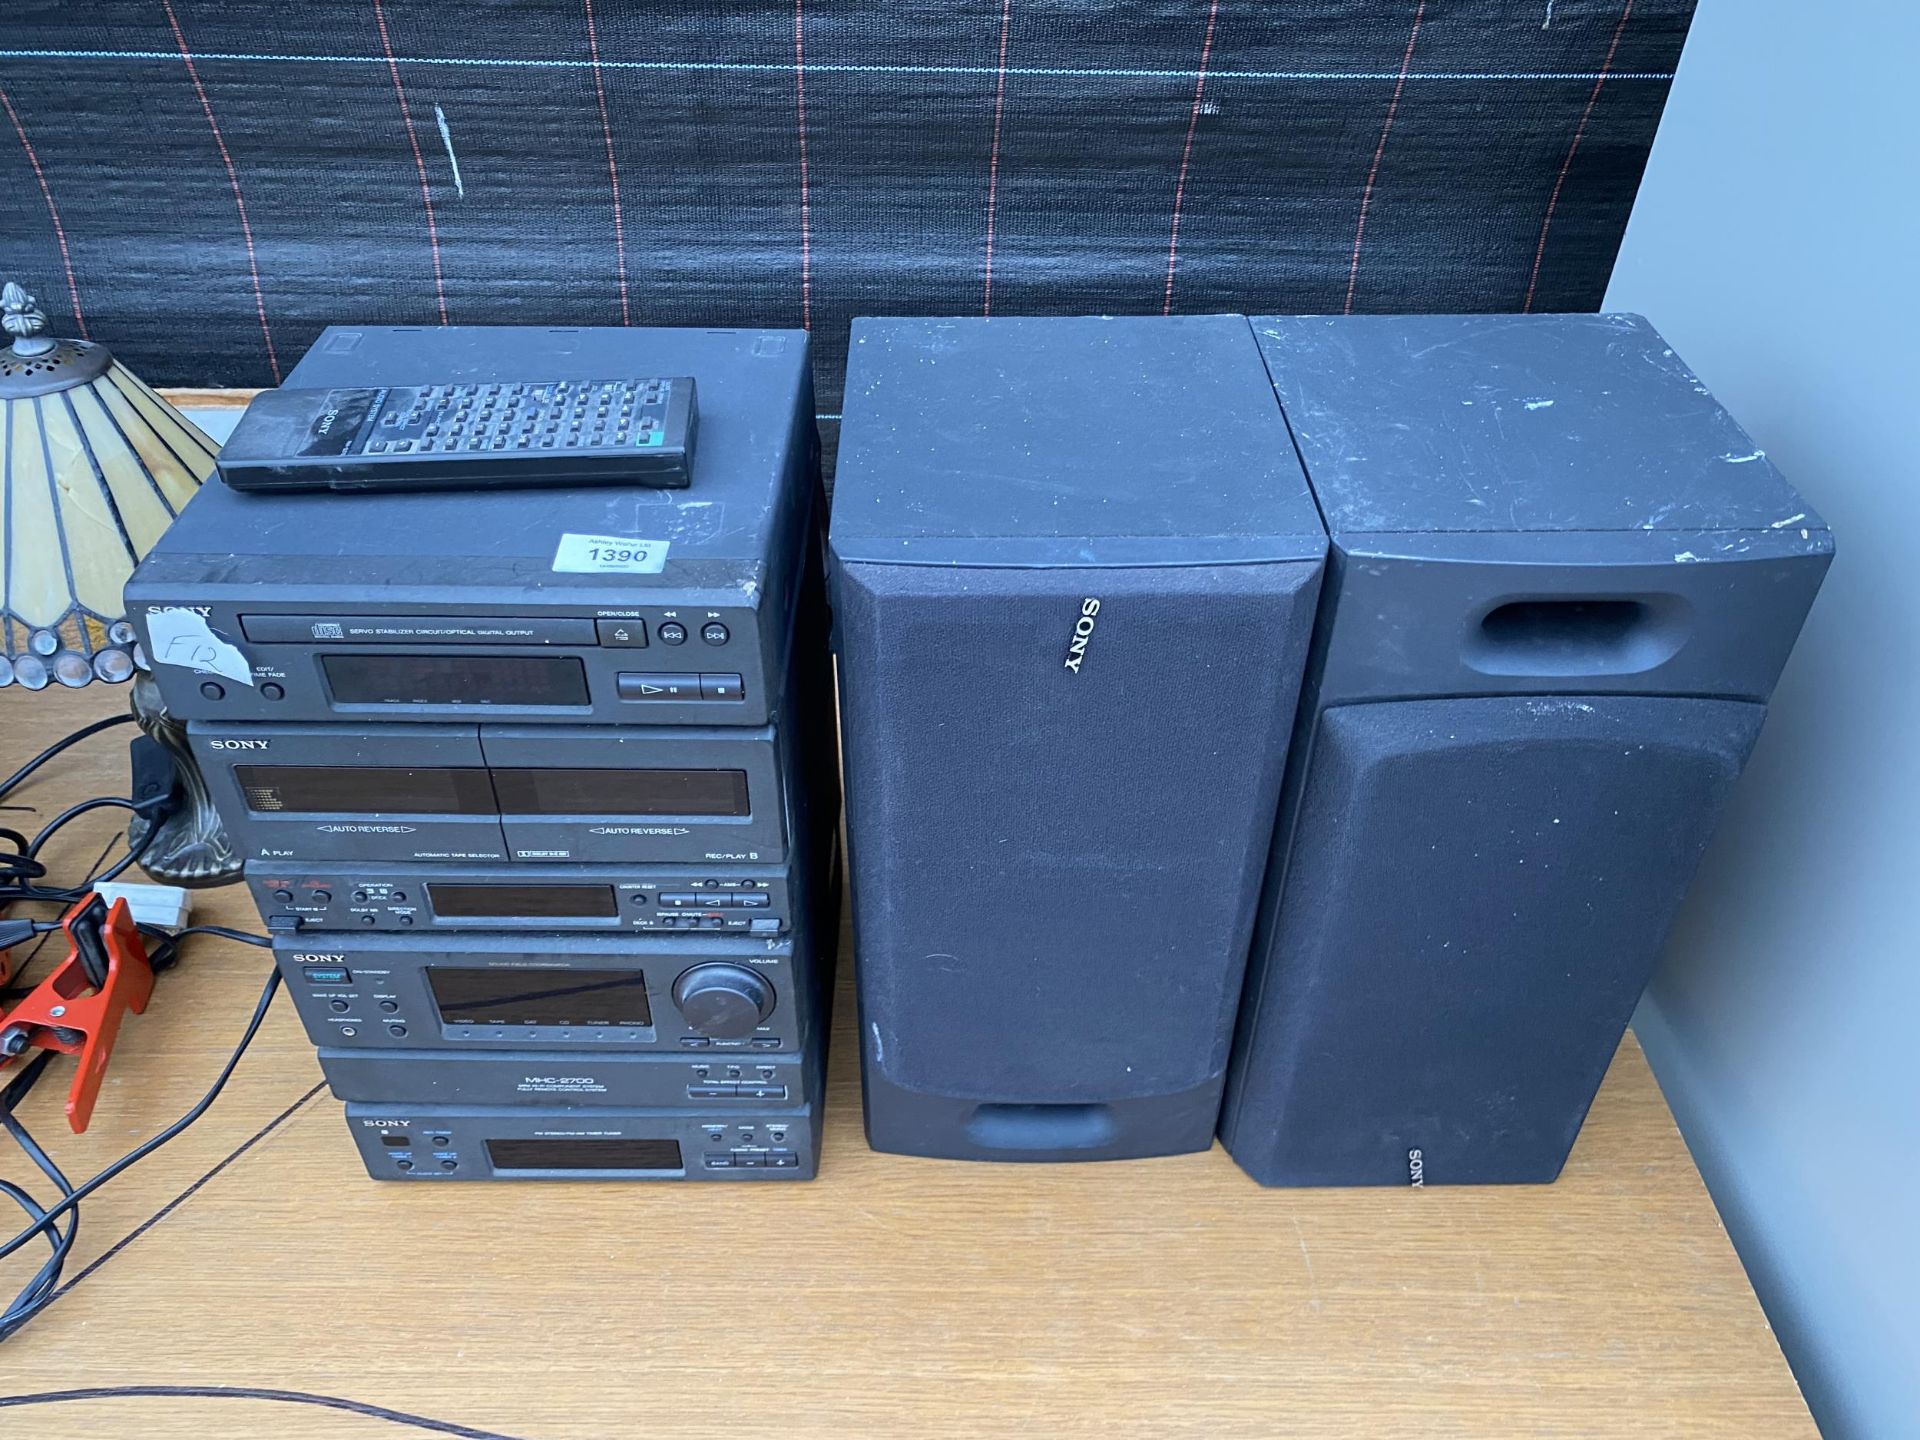 A SONY STEREO SYSTEM WITH CD PLAYER, TAPE PLAYER AND TUNER ALONG WITH TWO SPEAKERS